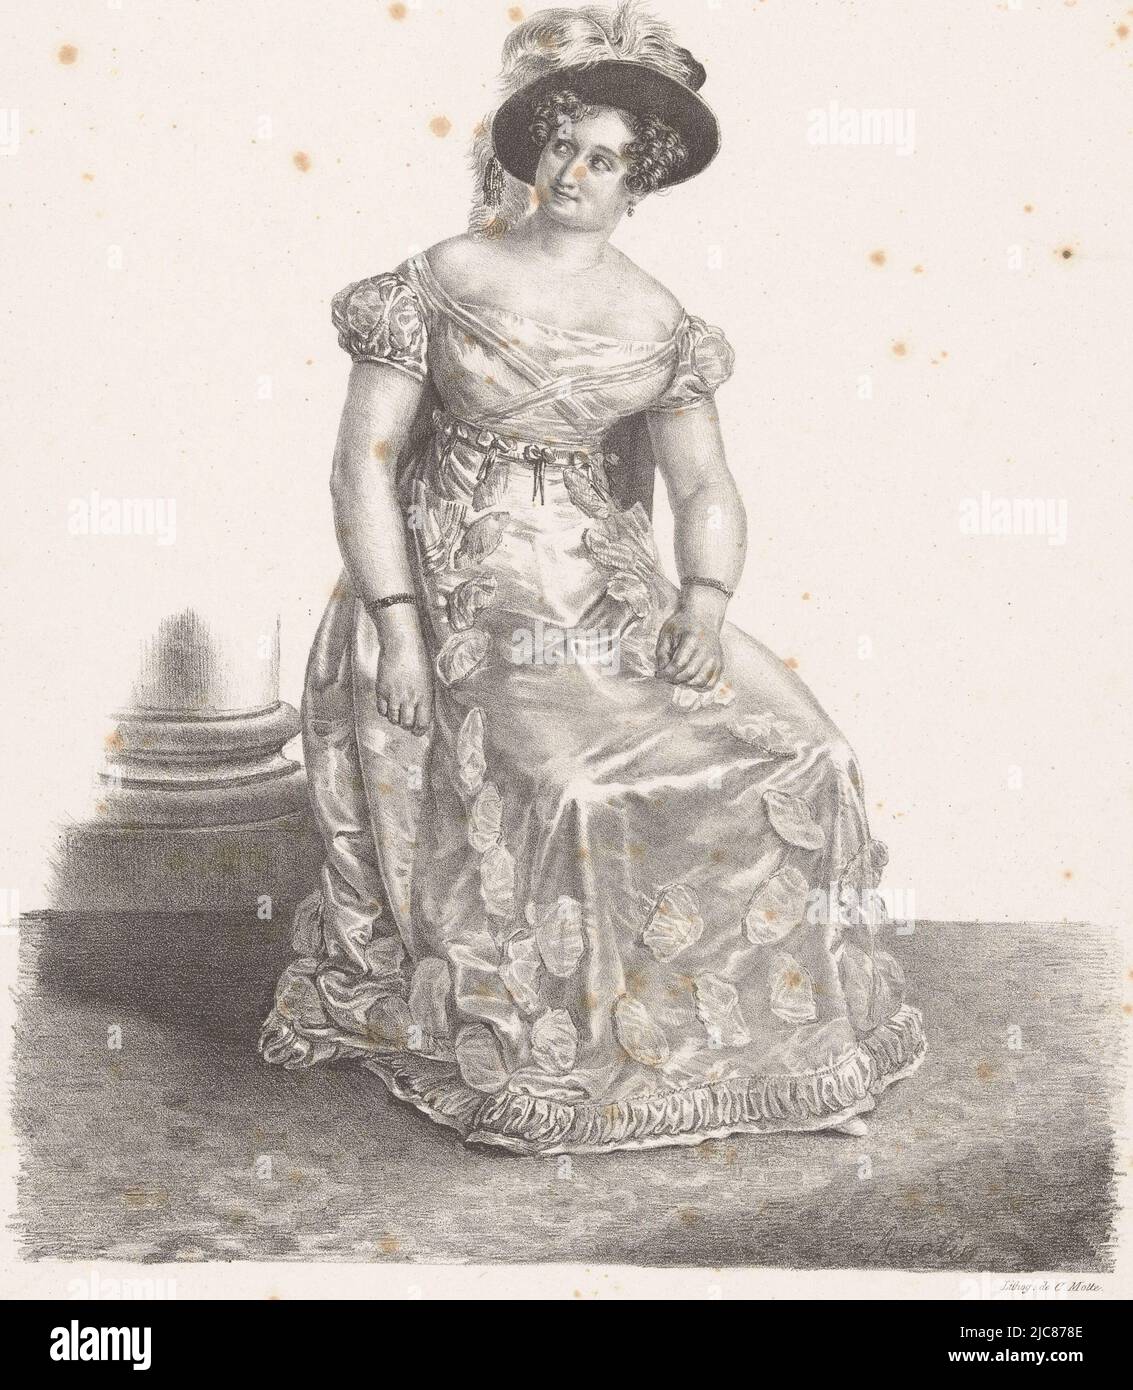 Portrait of Mademoiselle Mante as Rosine in Le Barbier de S, print maker: Alexandre Marie Colin, (mentioned on object), printer: Charles Etienne Pierre Motte, (mentioned on object), publisher: Francisique Noël (et Cie.), (mentioned on object), Paris, 1823 - 1824, paper, h 418 mm × w 288 mm Stock Photo